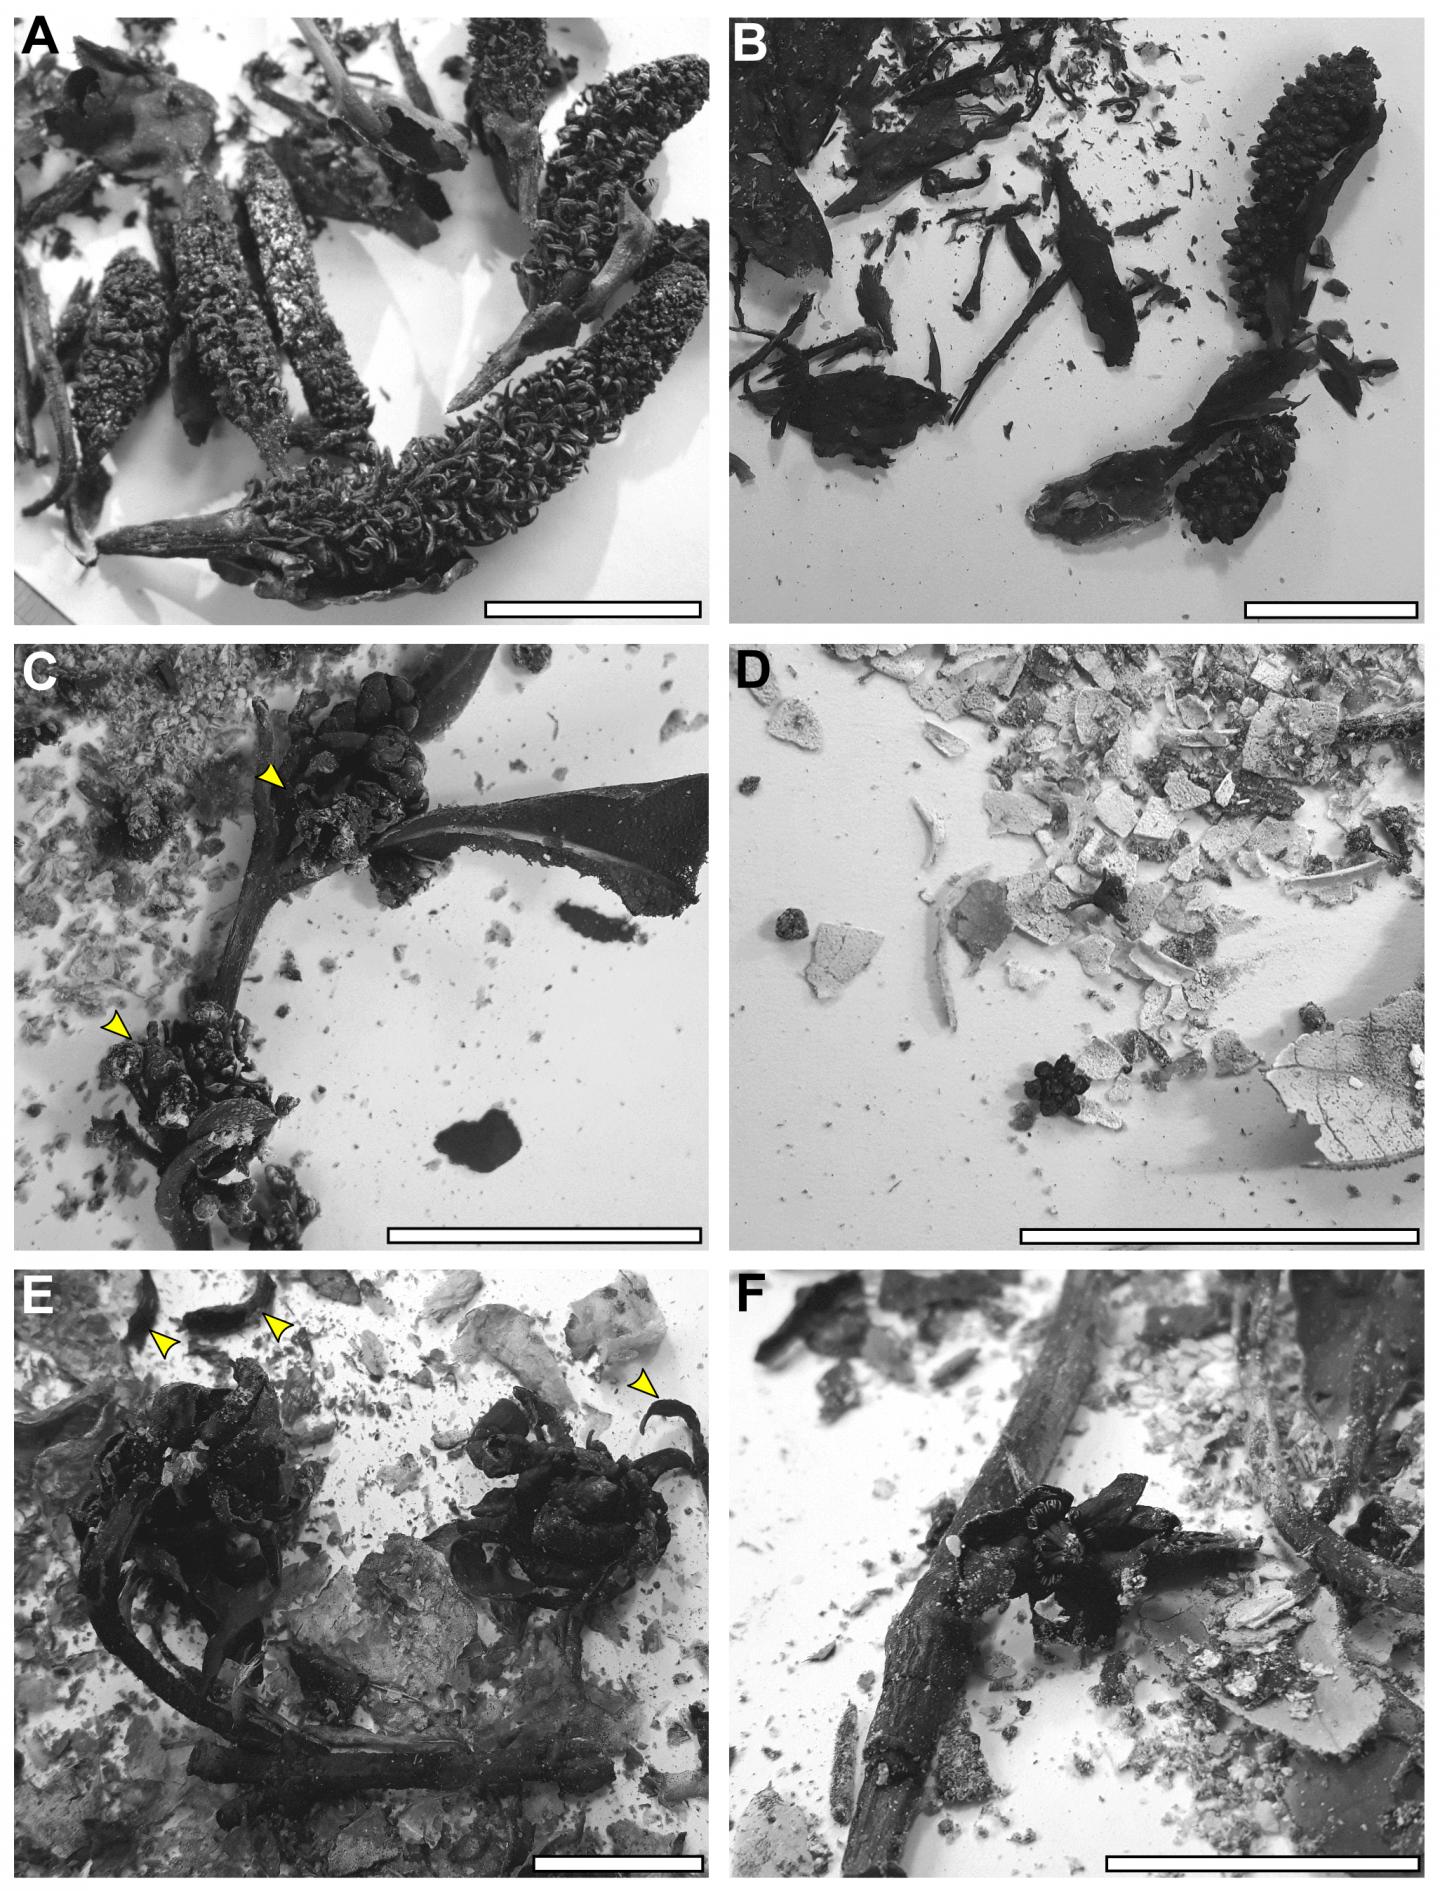 Post-burn Residues Containing Char and Ash from Flowers and Associated Vegetative Material